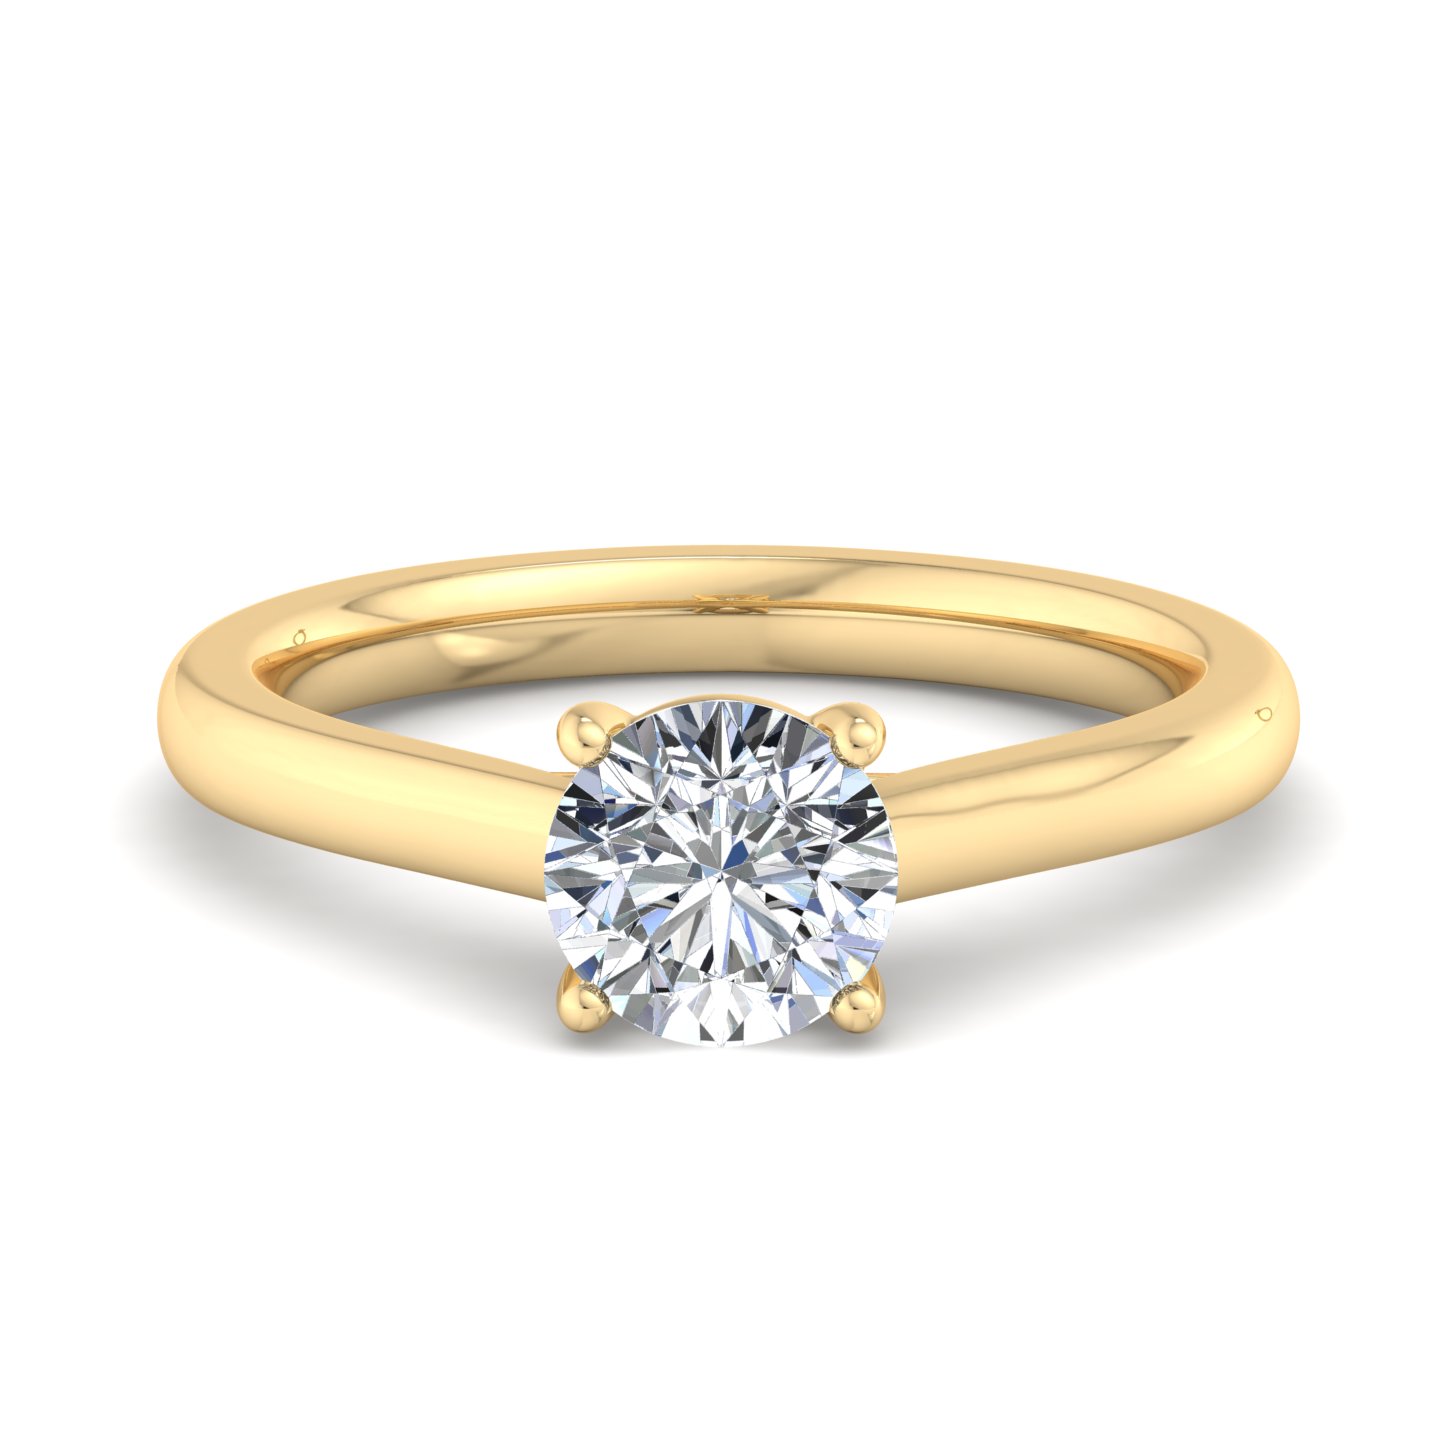 Summer Solitaire engagement ring